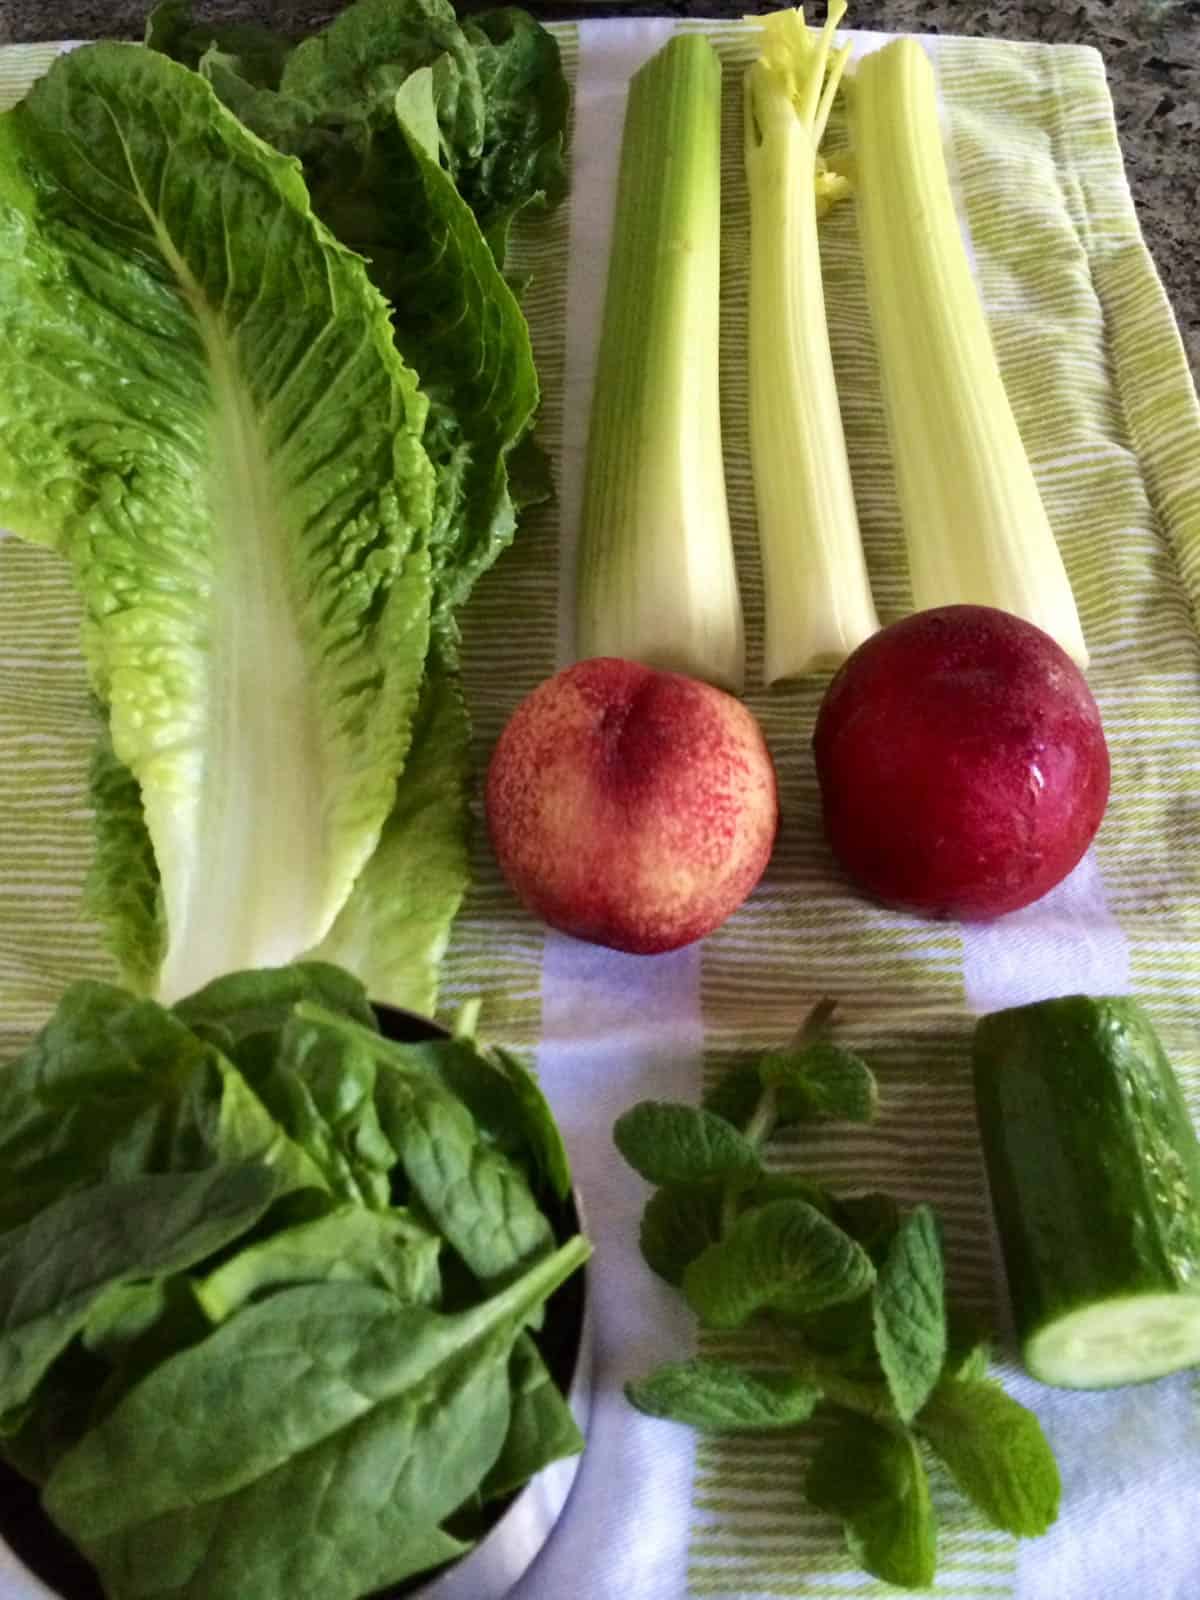 Ingredients for green juice drying on a kitchen towel.